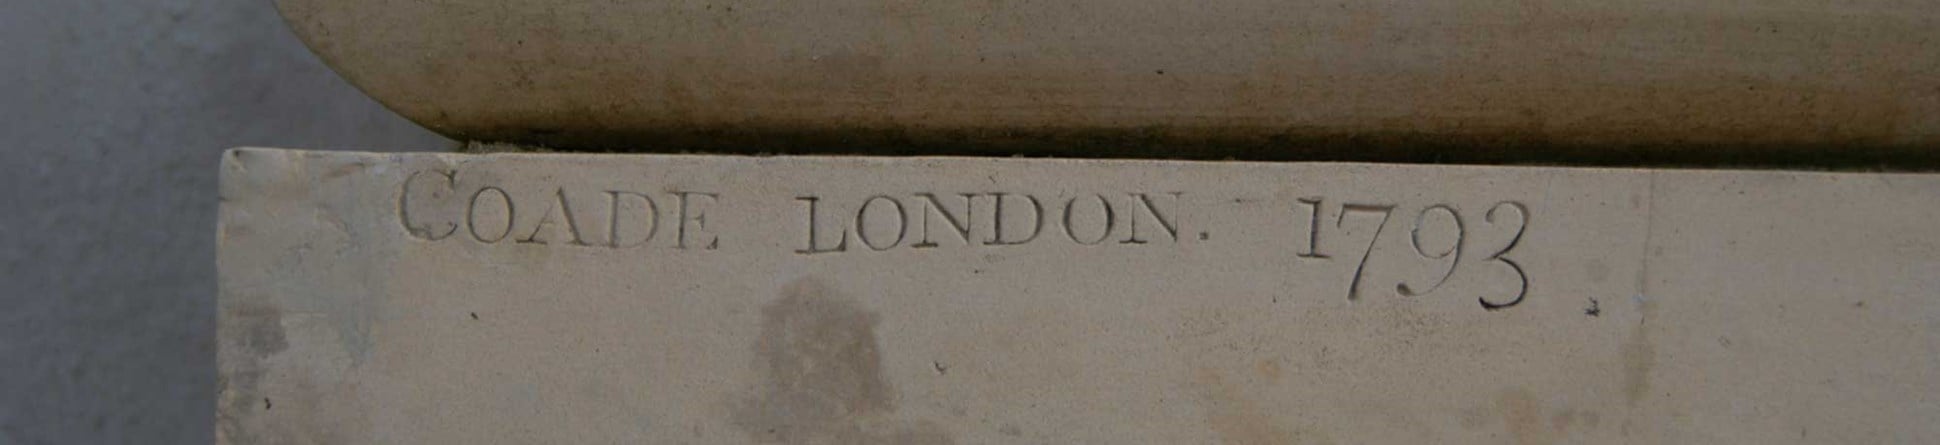 Coade London 1793 stamped on the stone